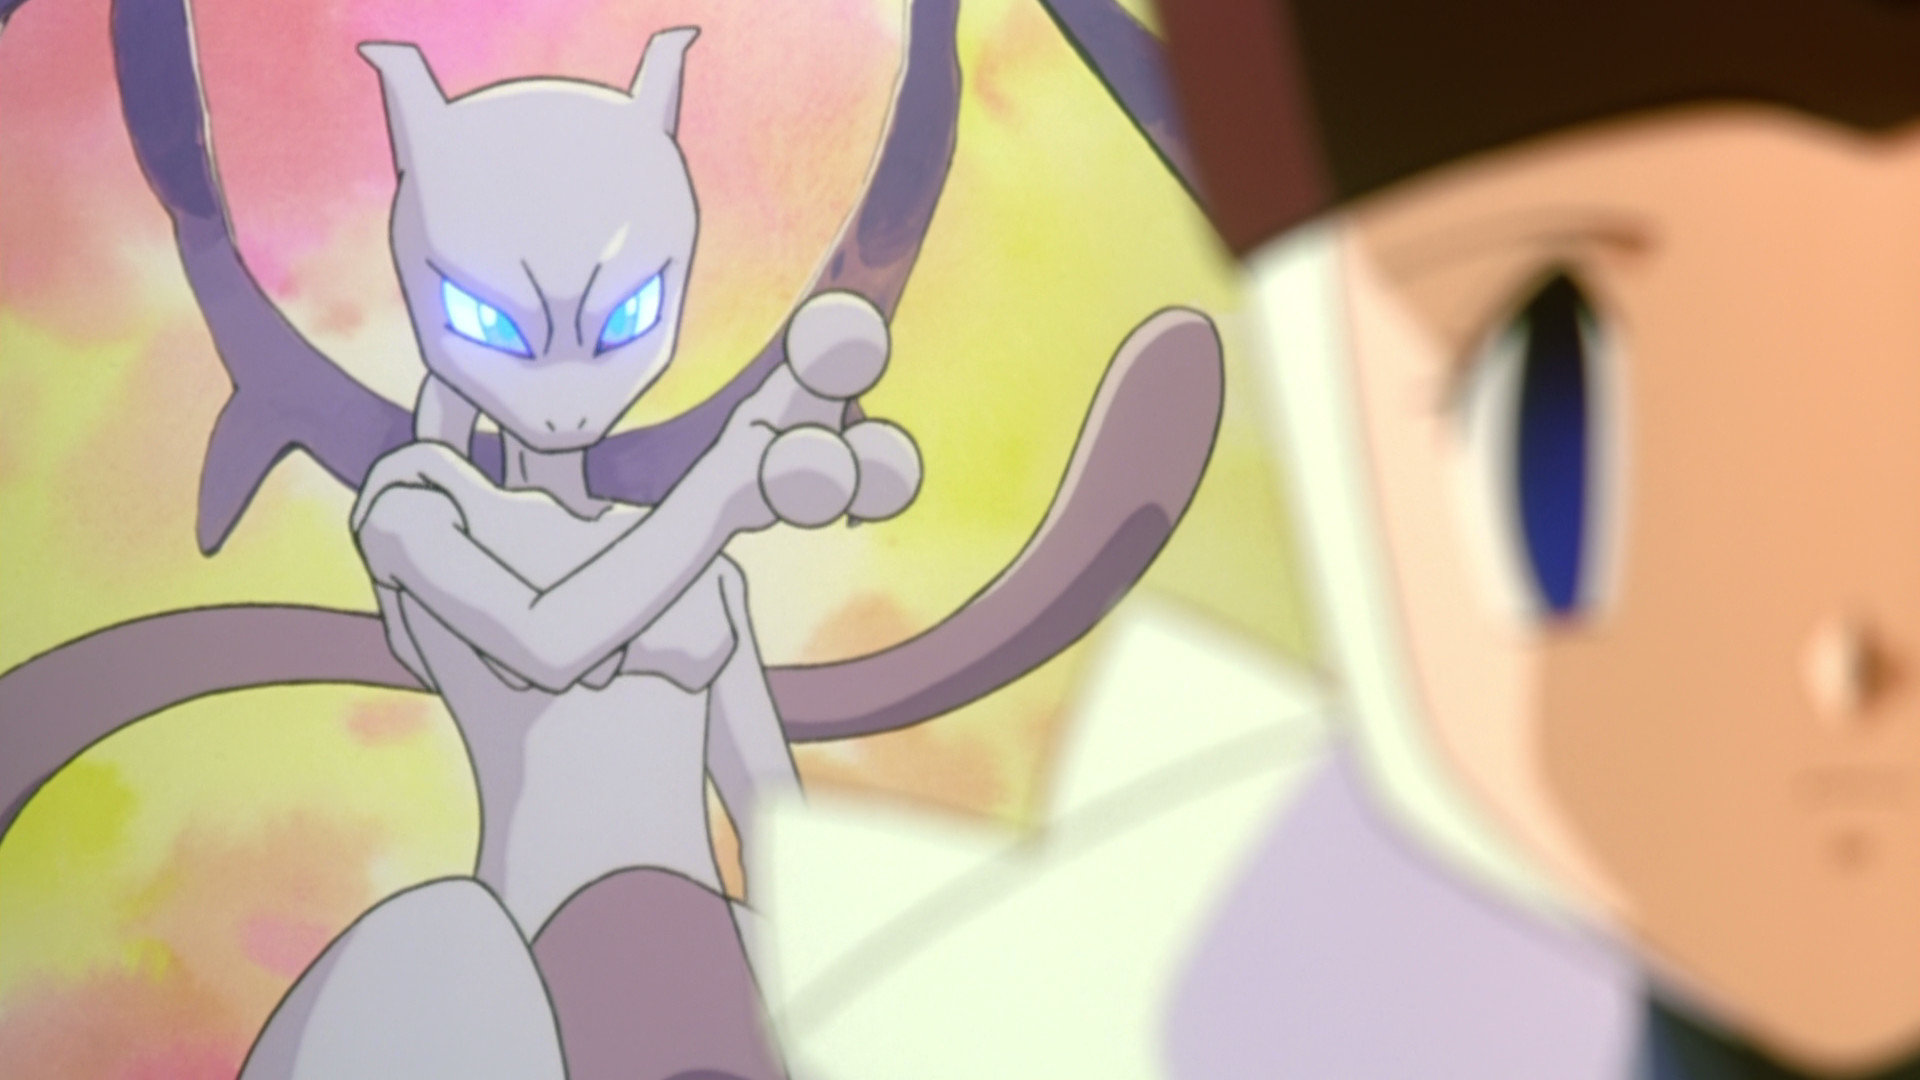 Download full hd 1080p Mewtwo (Pokemon) PC wallpaper ID:279976 for free